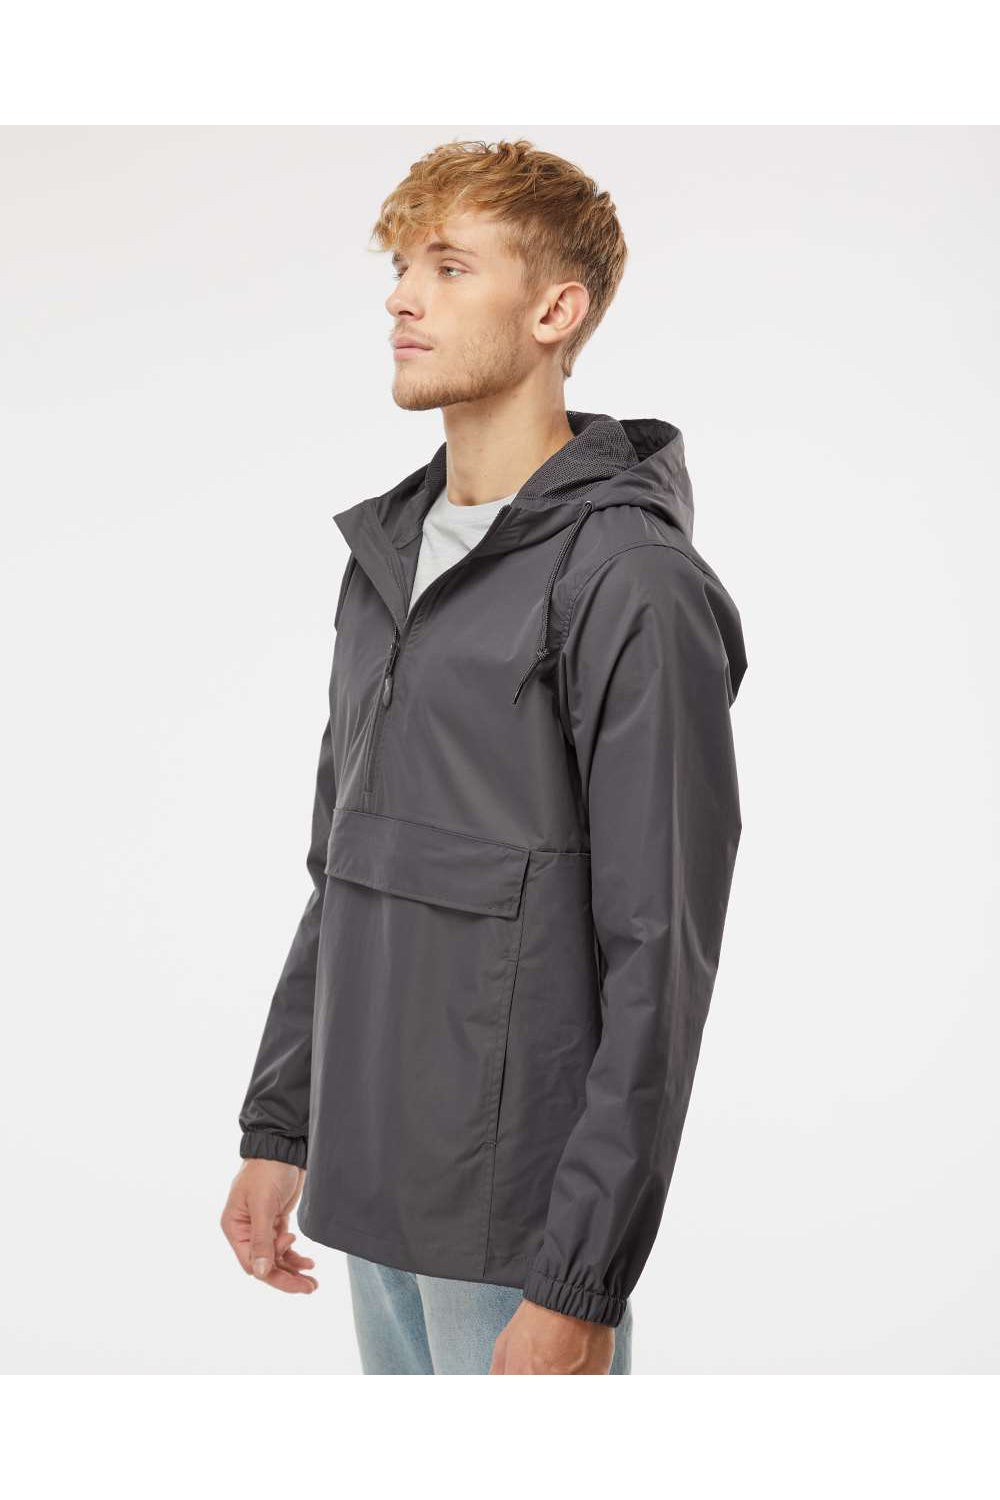 Independent Trading Co. EXP94NAW Mens Nylon Hooded Anorak Jacket Graphite Grey Model Side